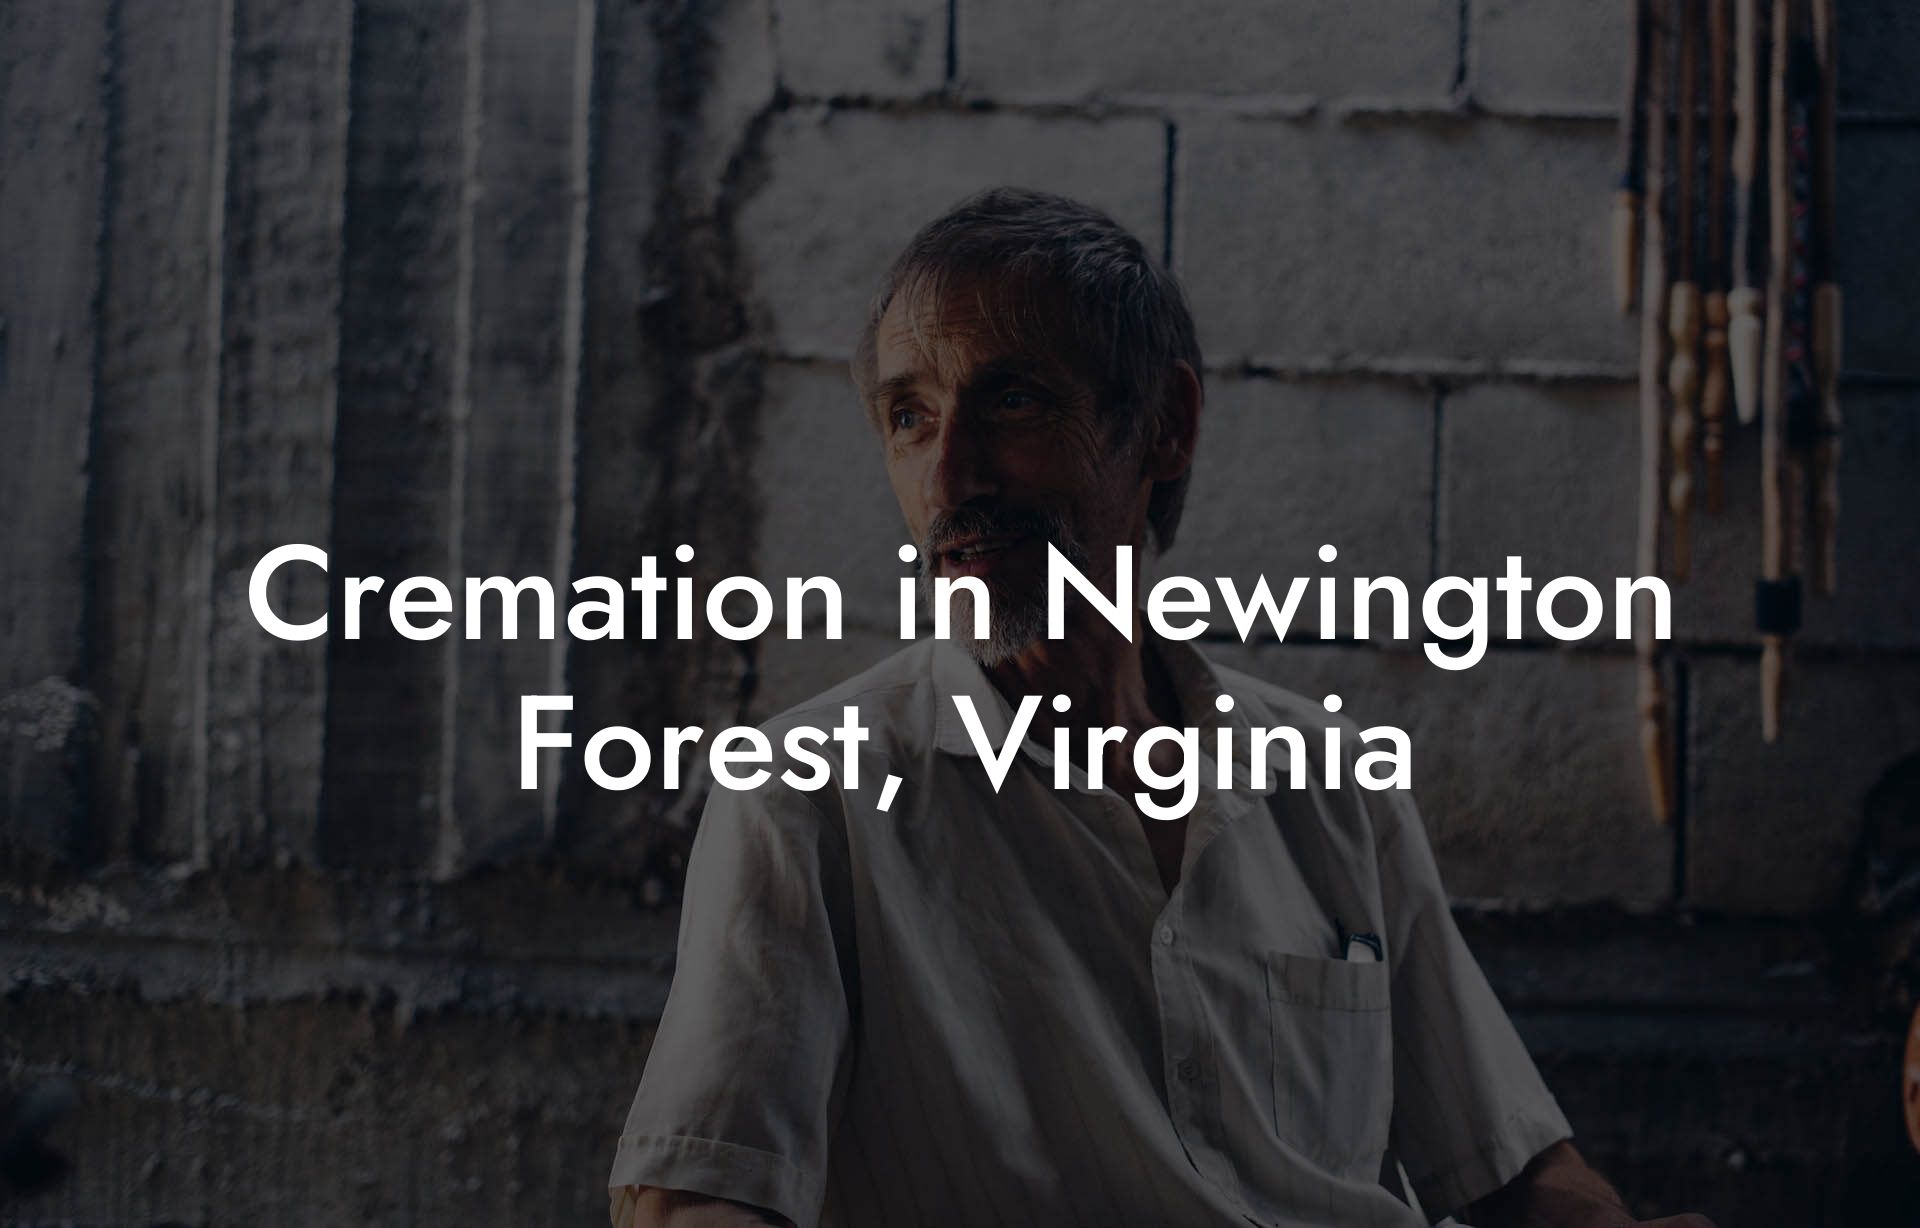 Cremation in Newington Forest, Virginia